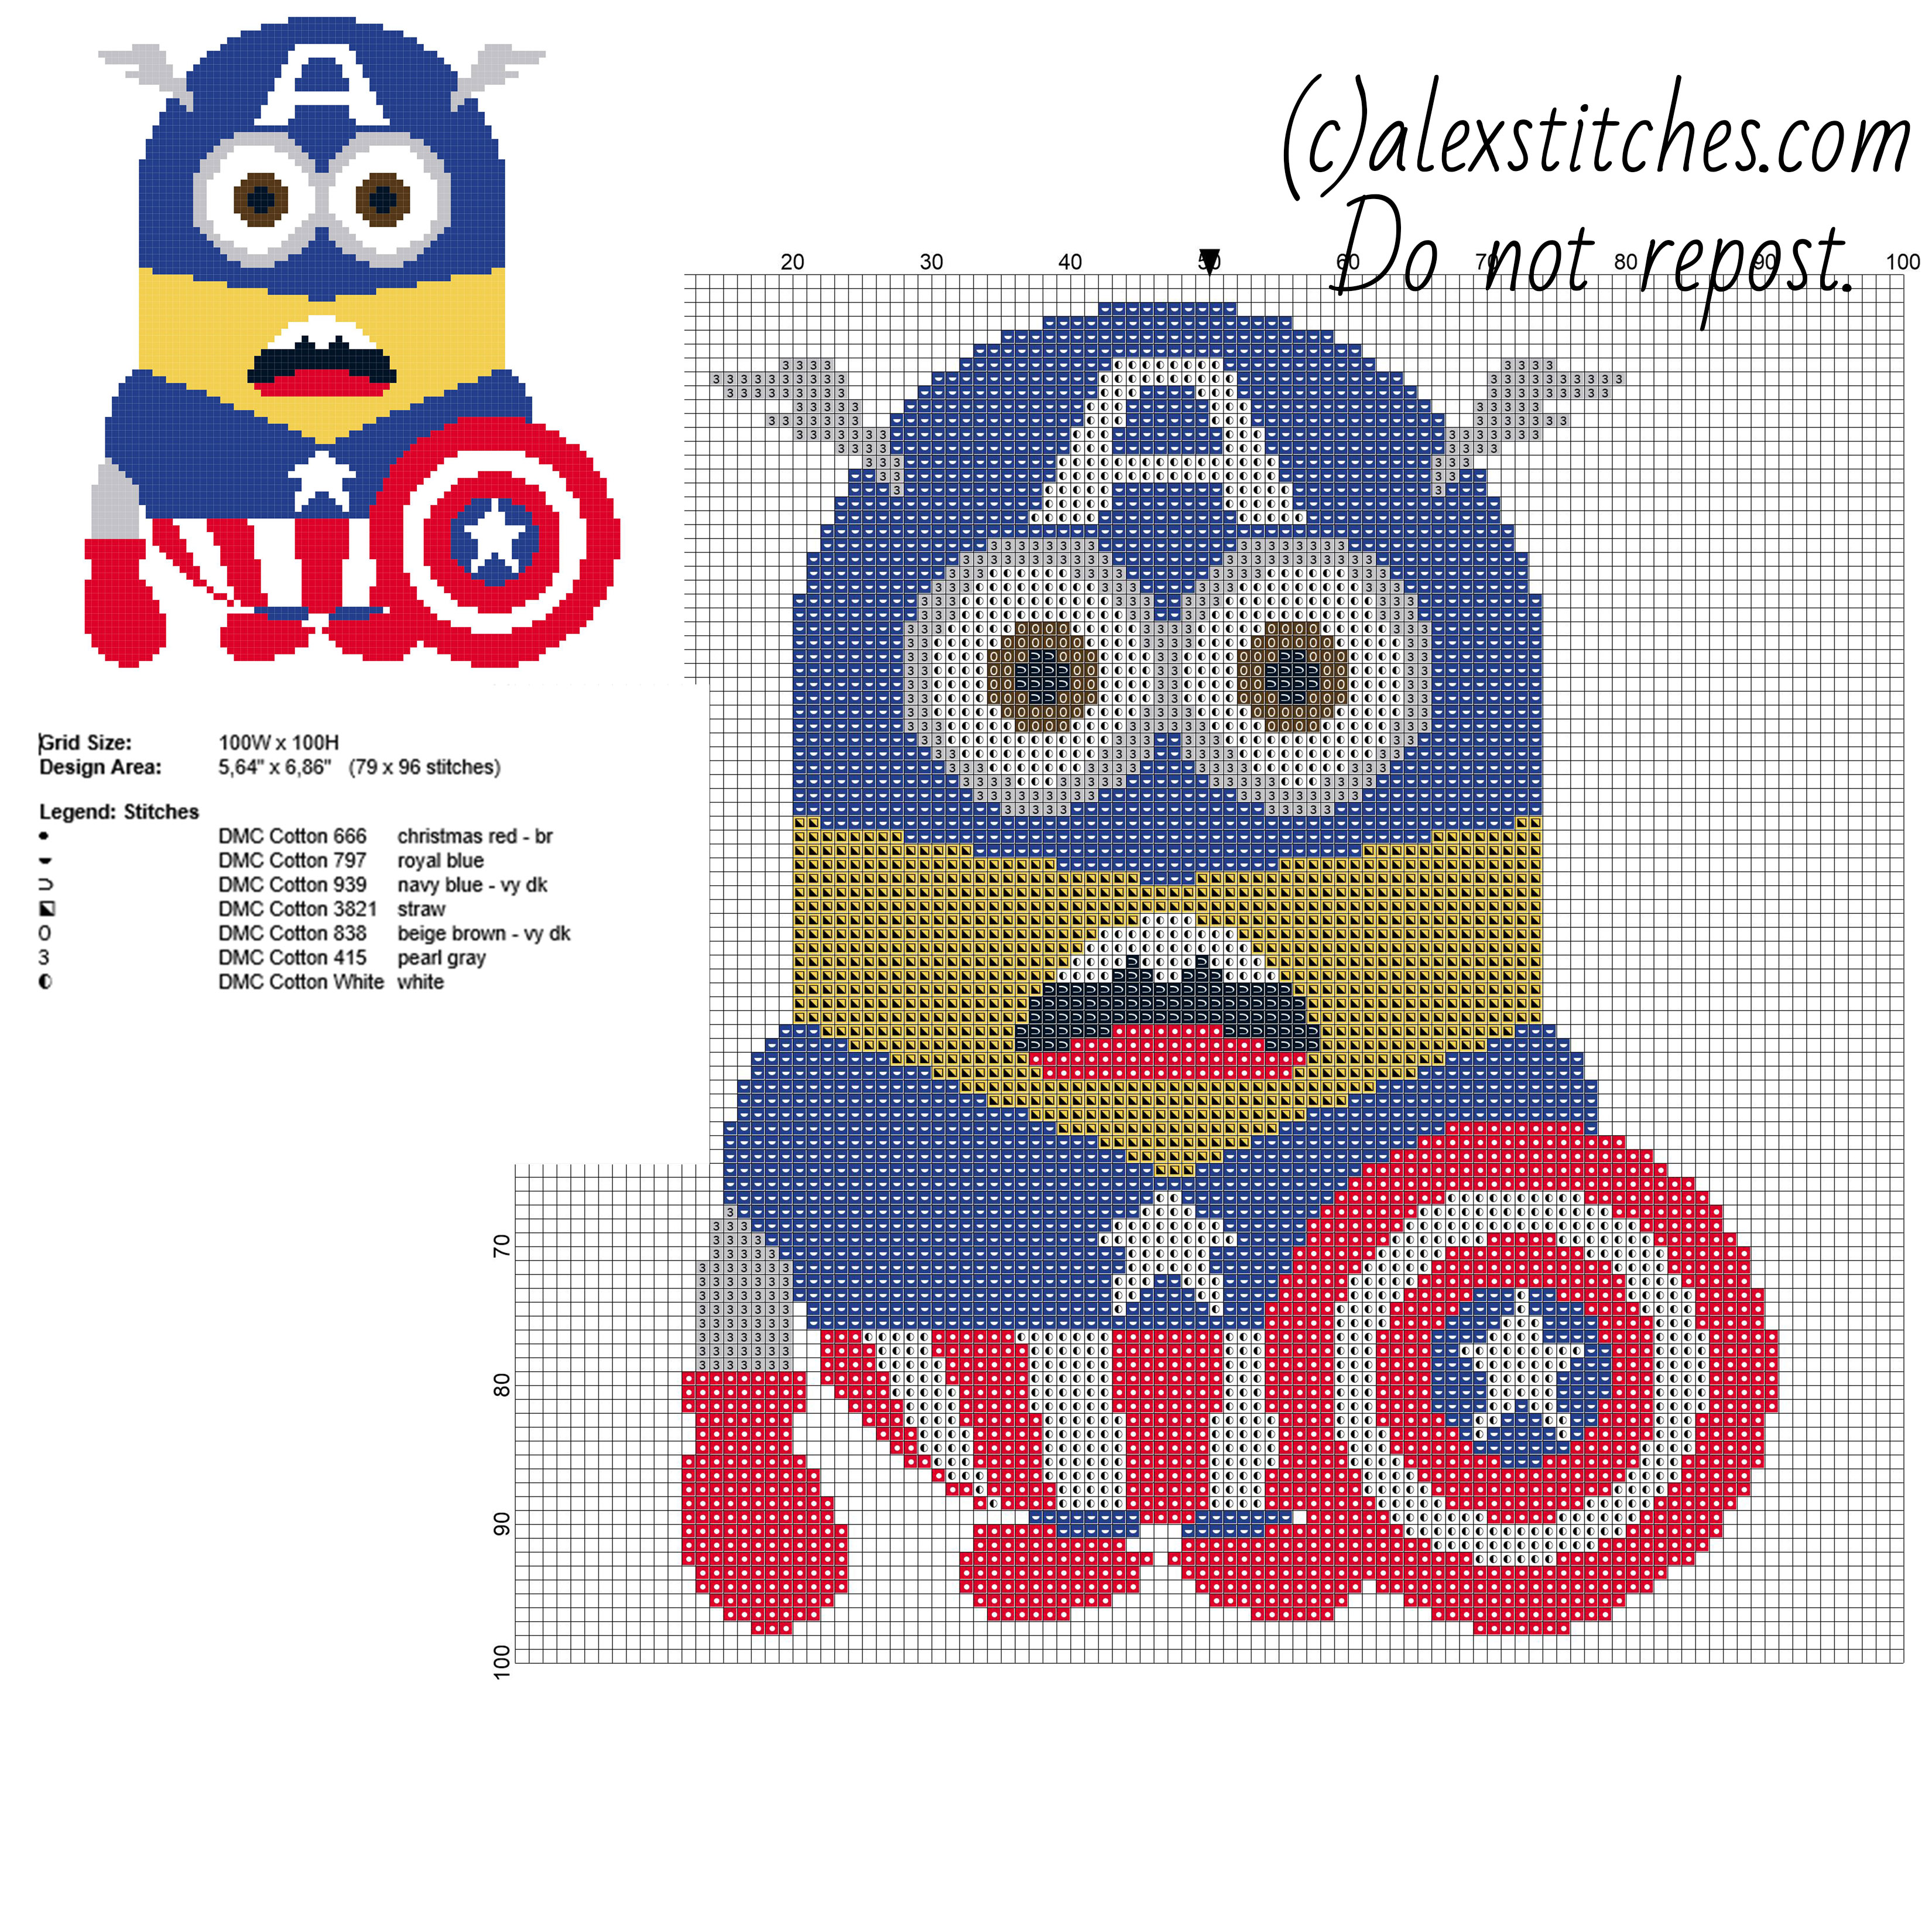 Minion Captain America from cartoon Despicable Me free cross stitch pattern 79 x 96 stitches 7 DMC threads colors